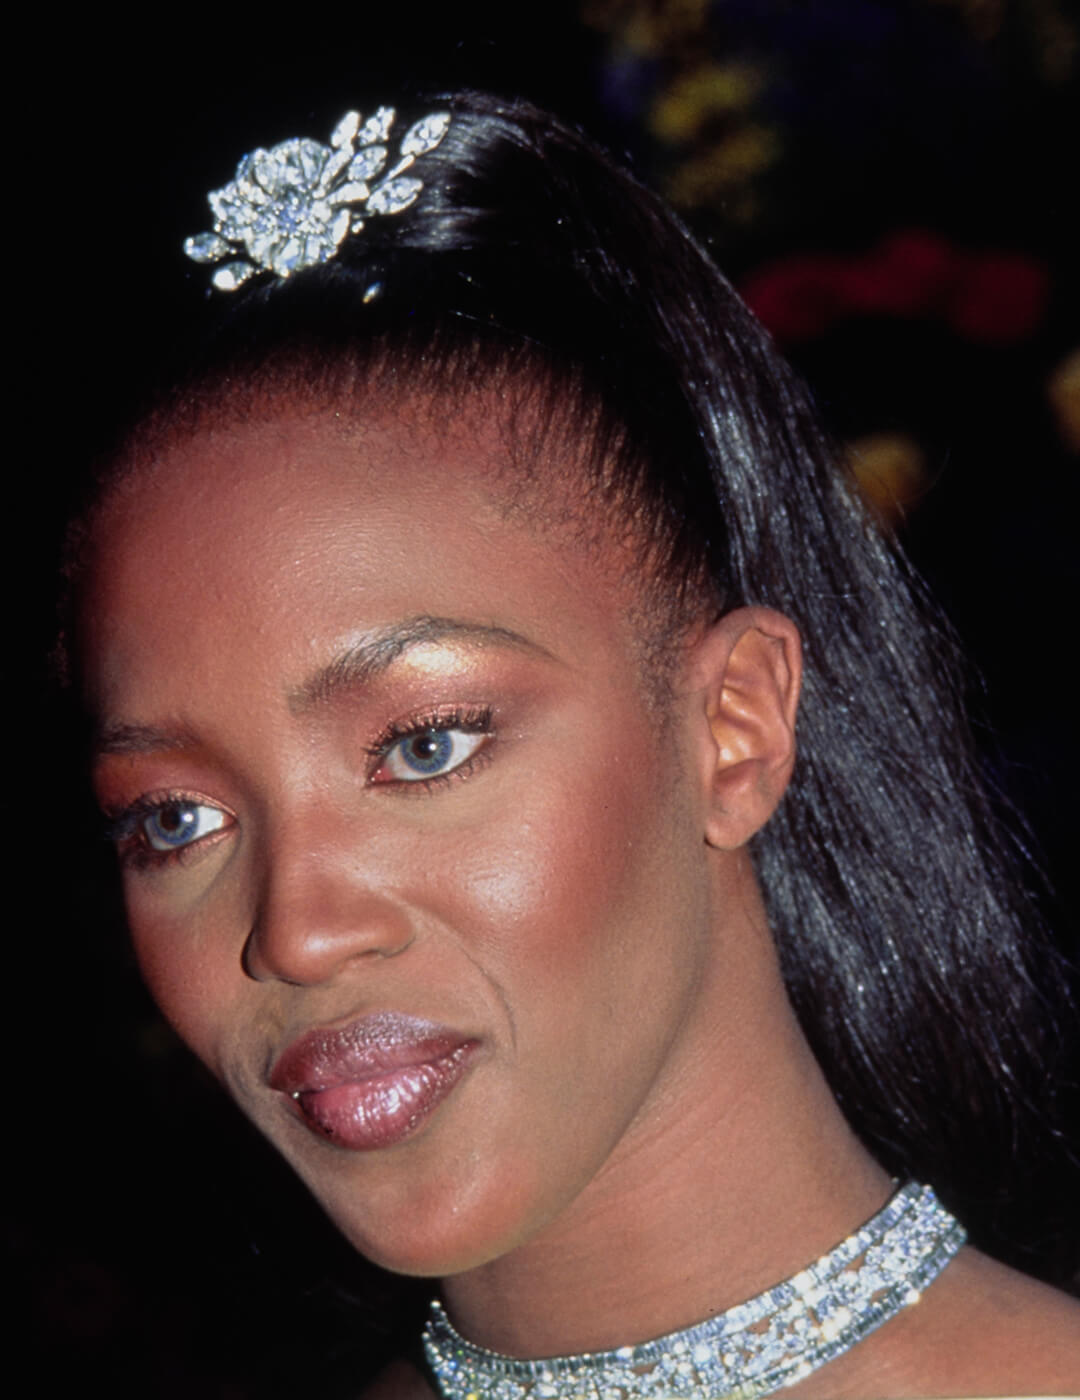 Younger Naomi Campbell rocking the red carpet in a spider lashes eye makeup look